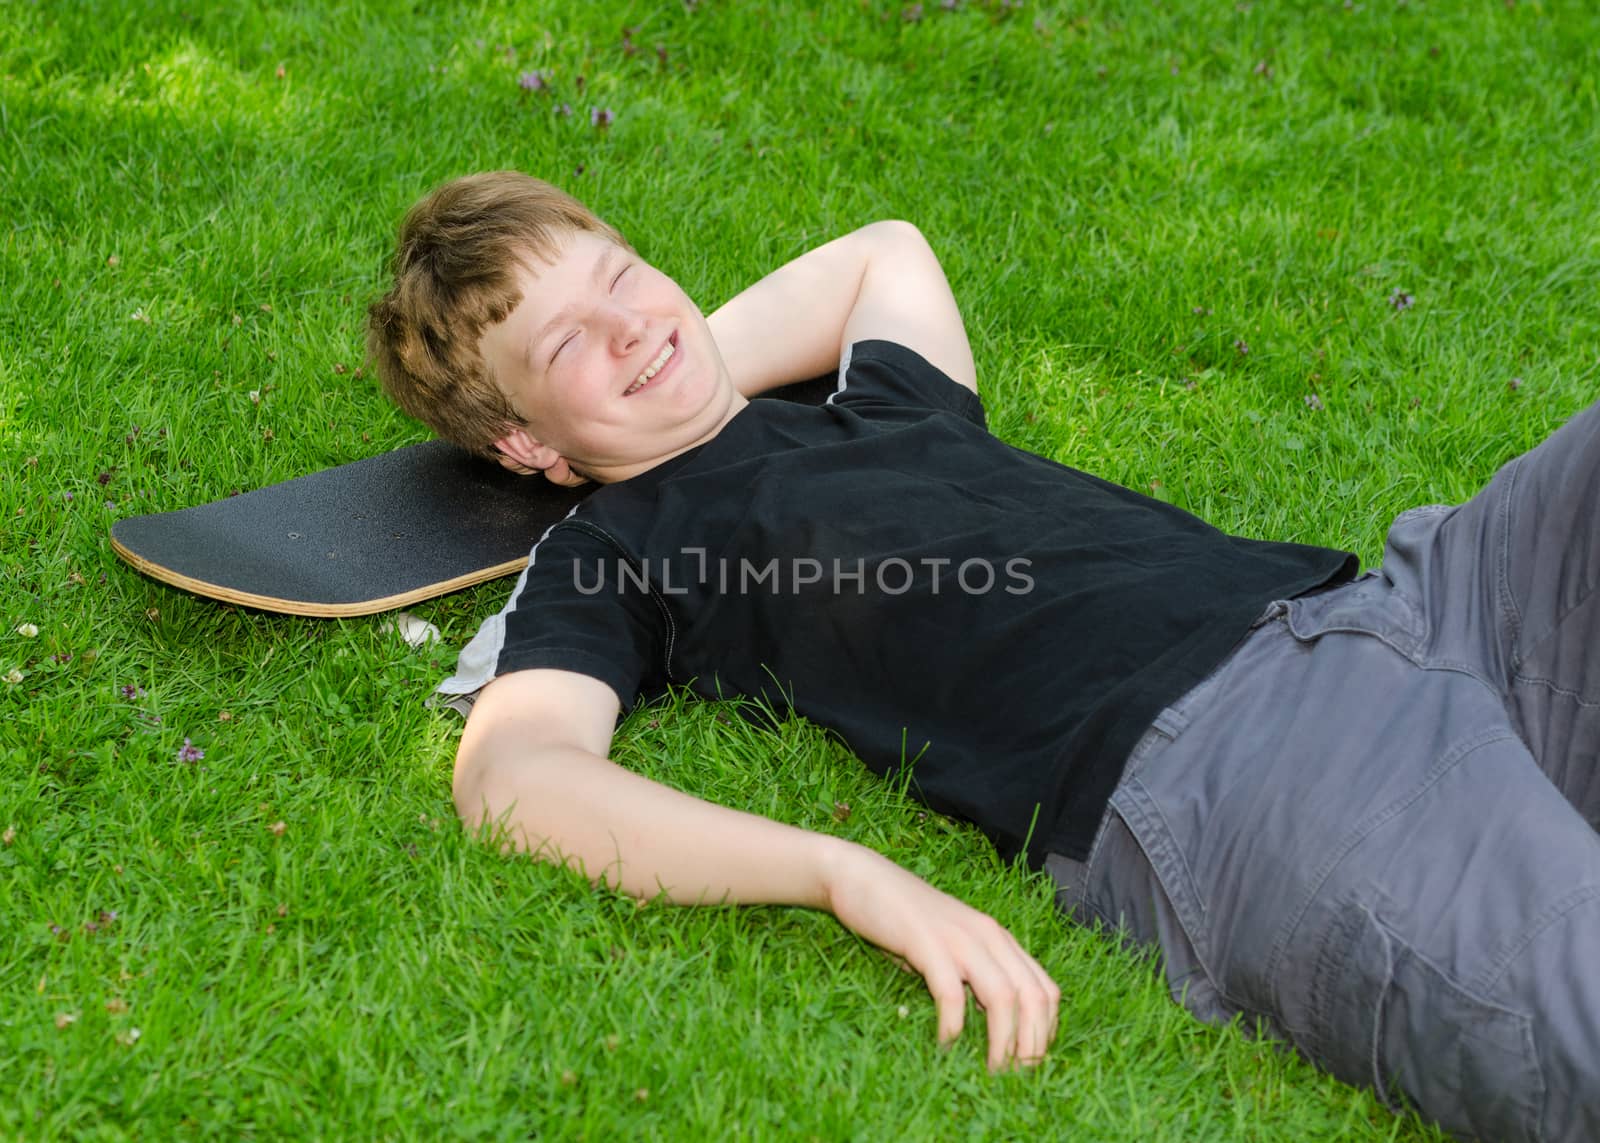 Laughing guy relax on skateboard in park grass and rest after an active leisure